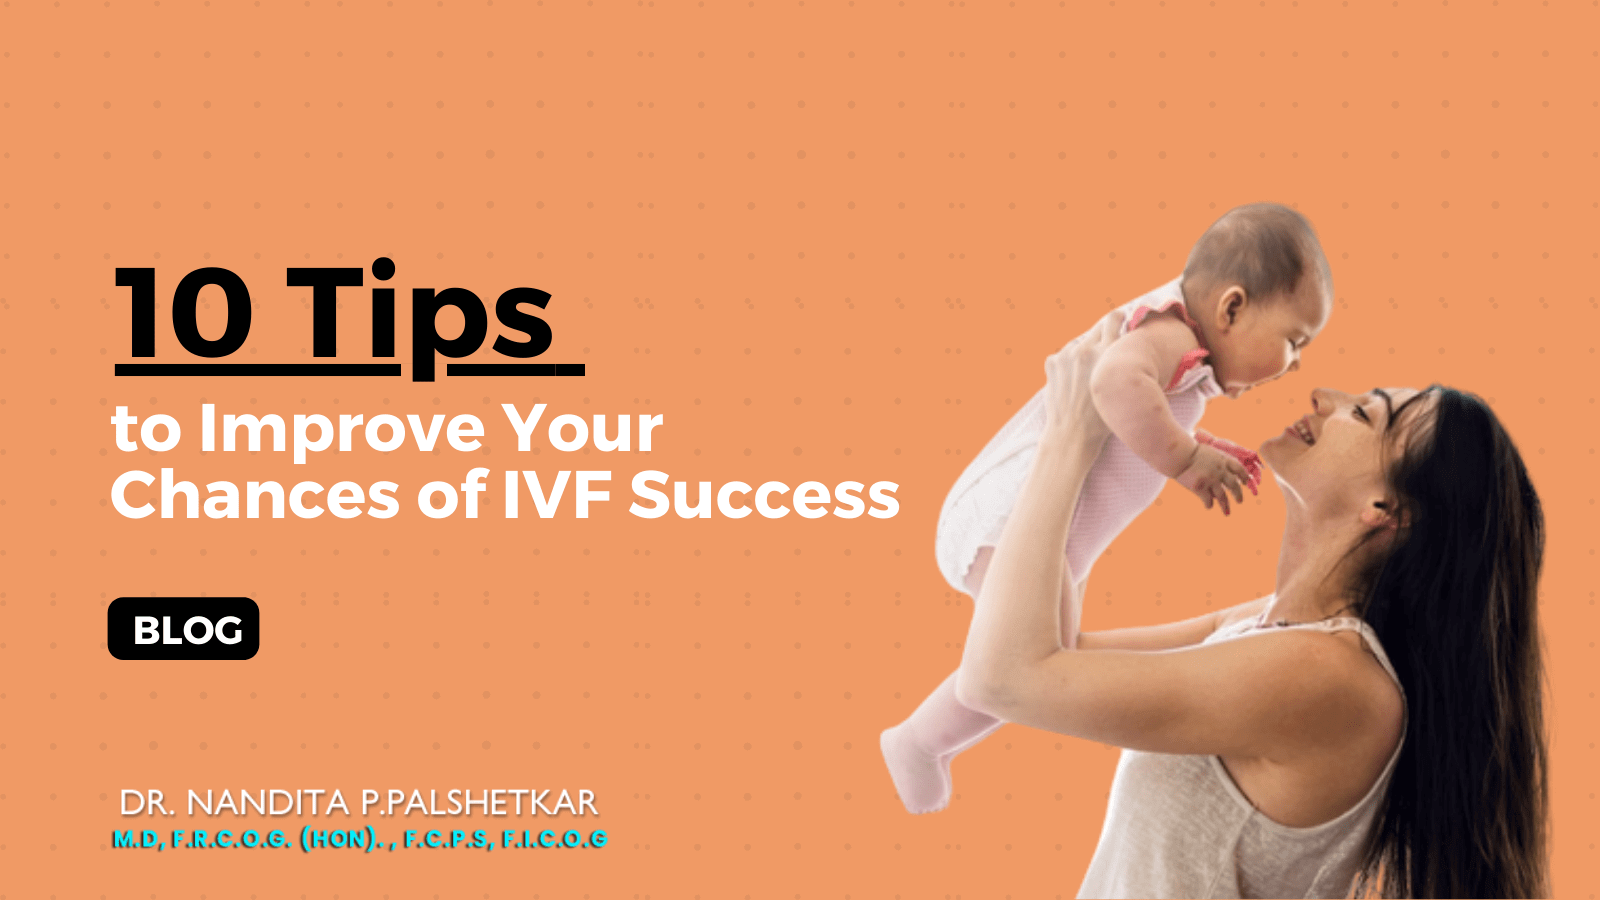 10 Tips to Improve Your Chances of IVF Success